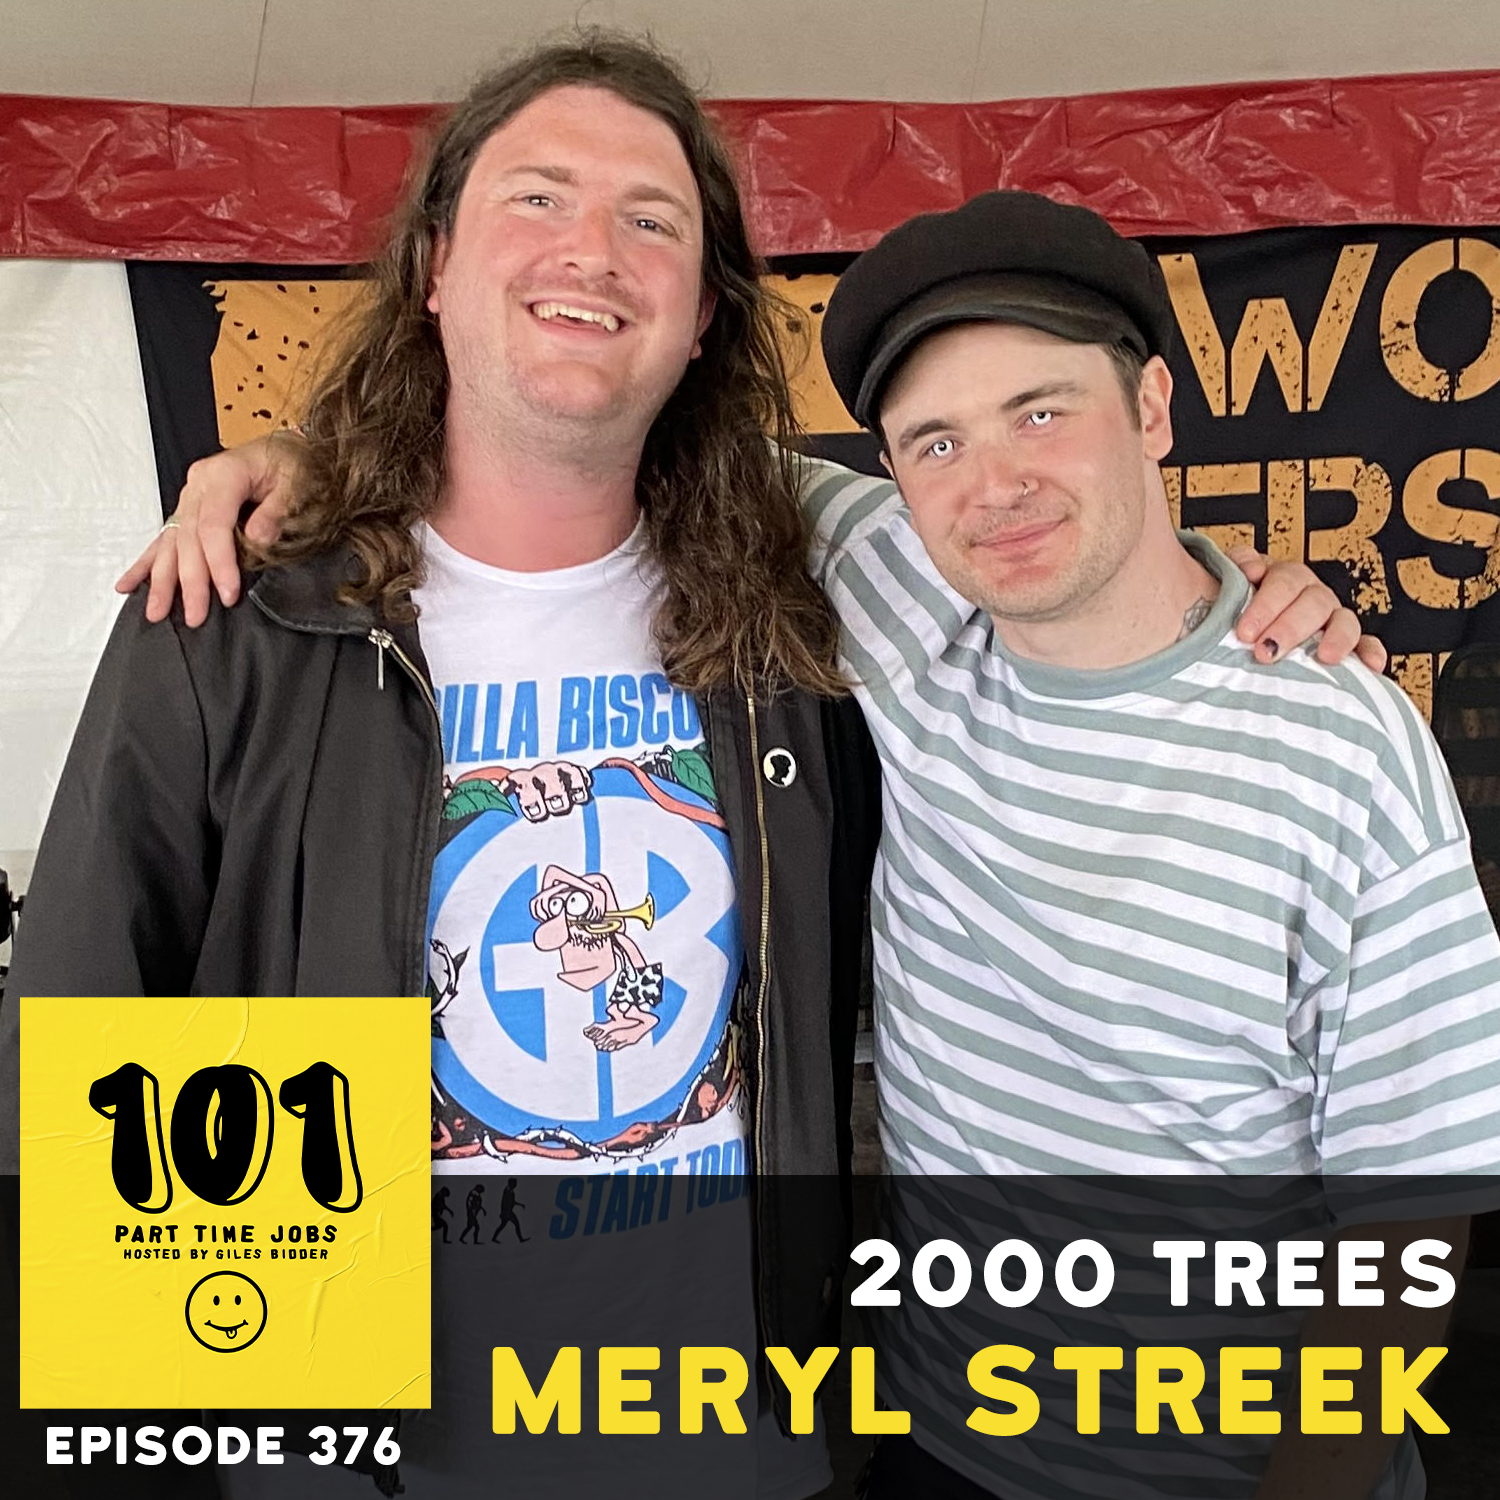 Episode Meryl Streek - "It drove me to say what I needed to say"